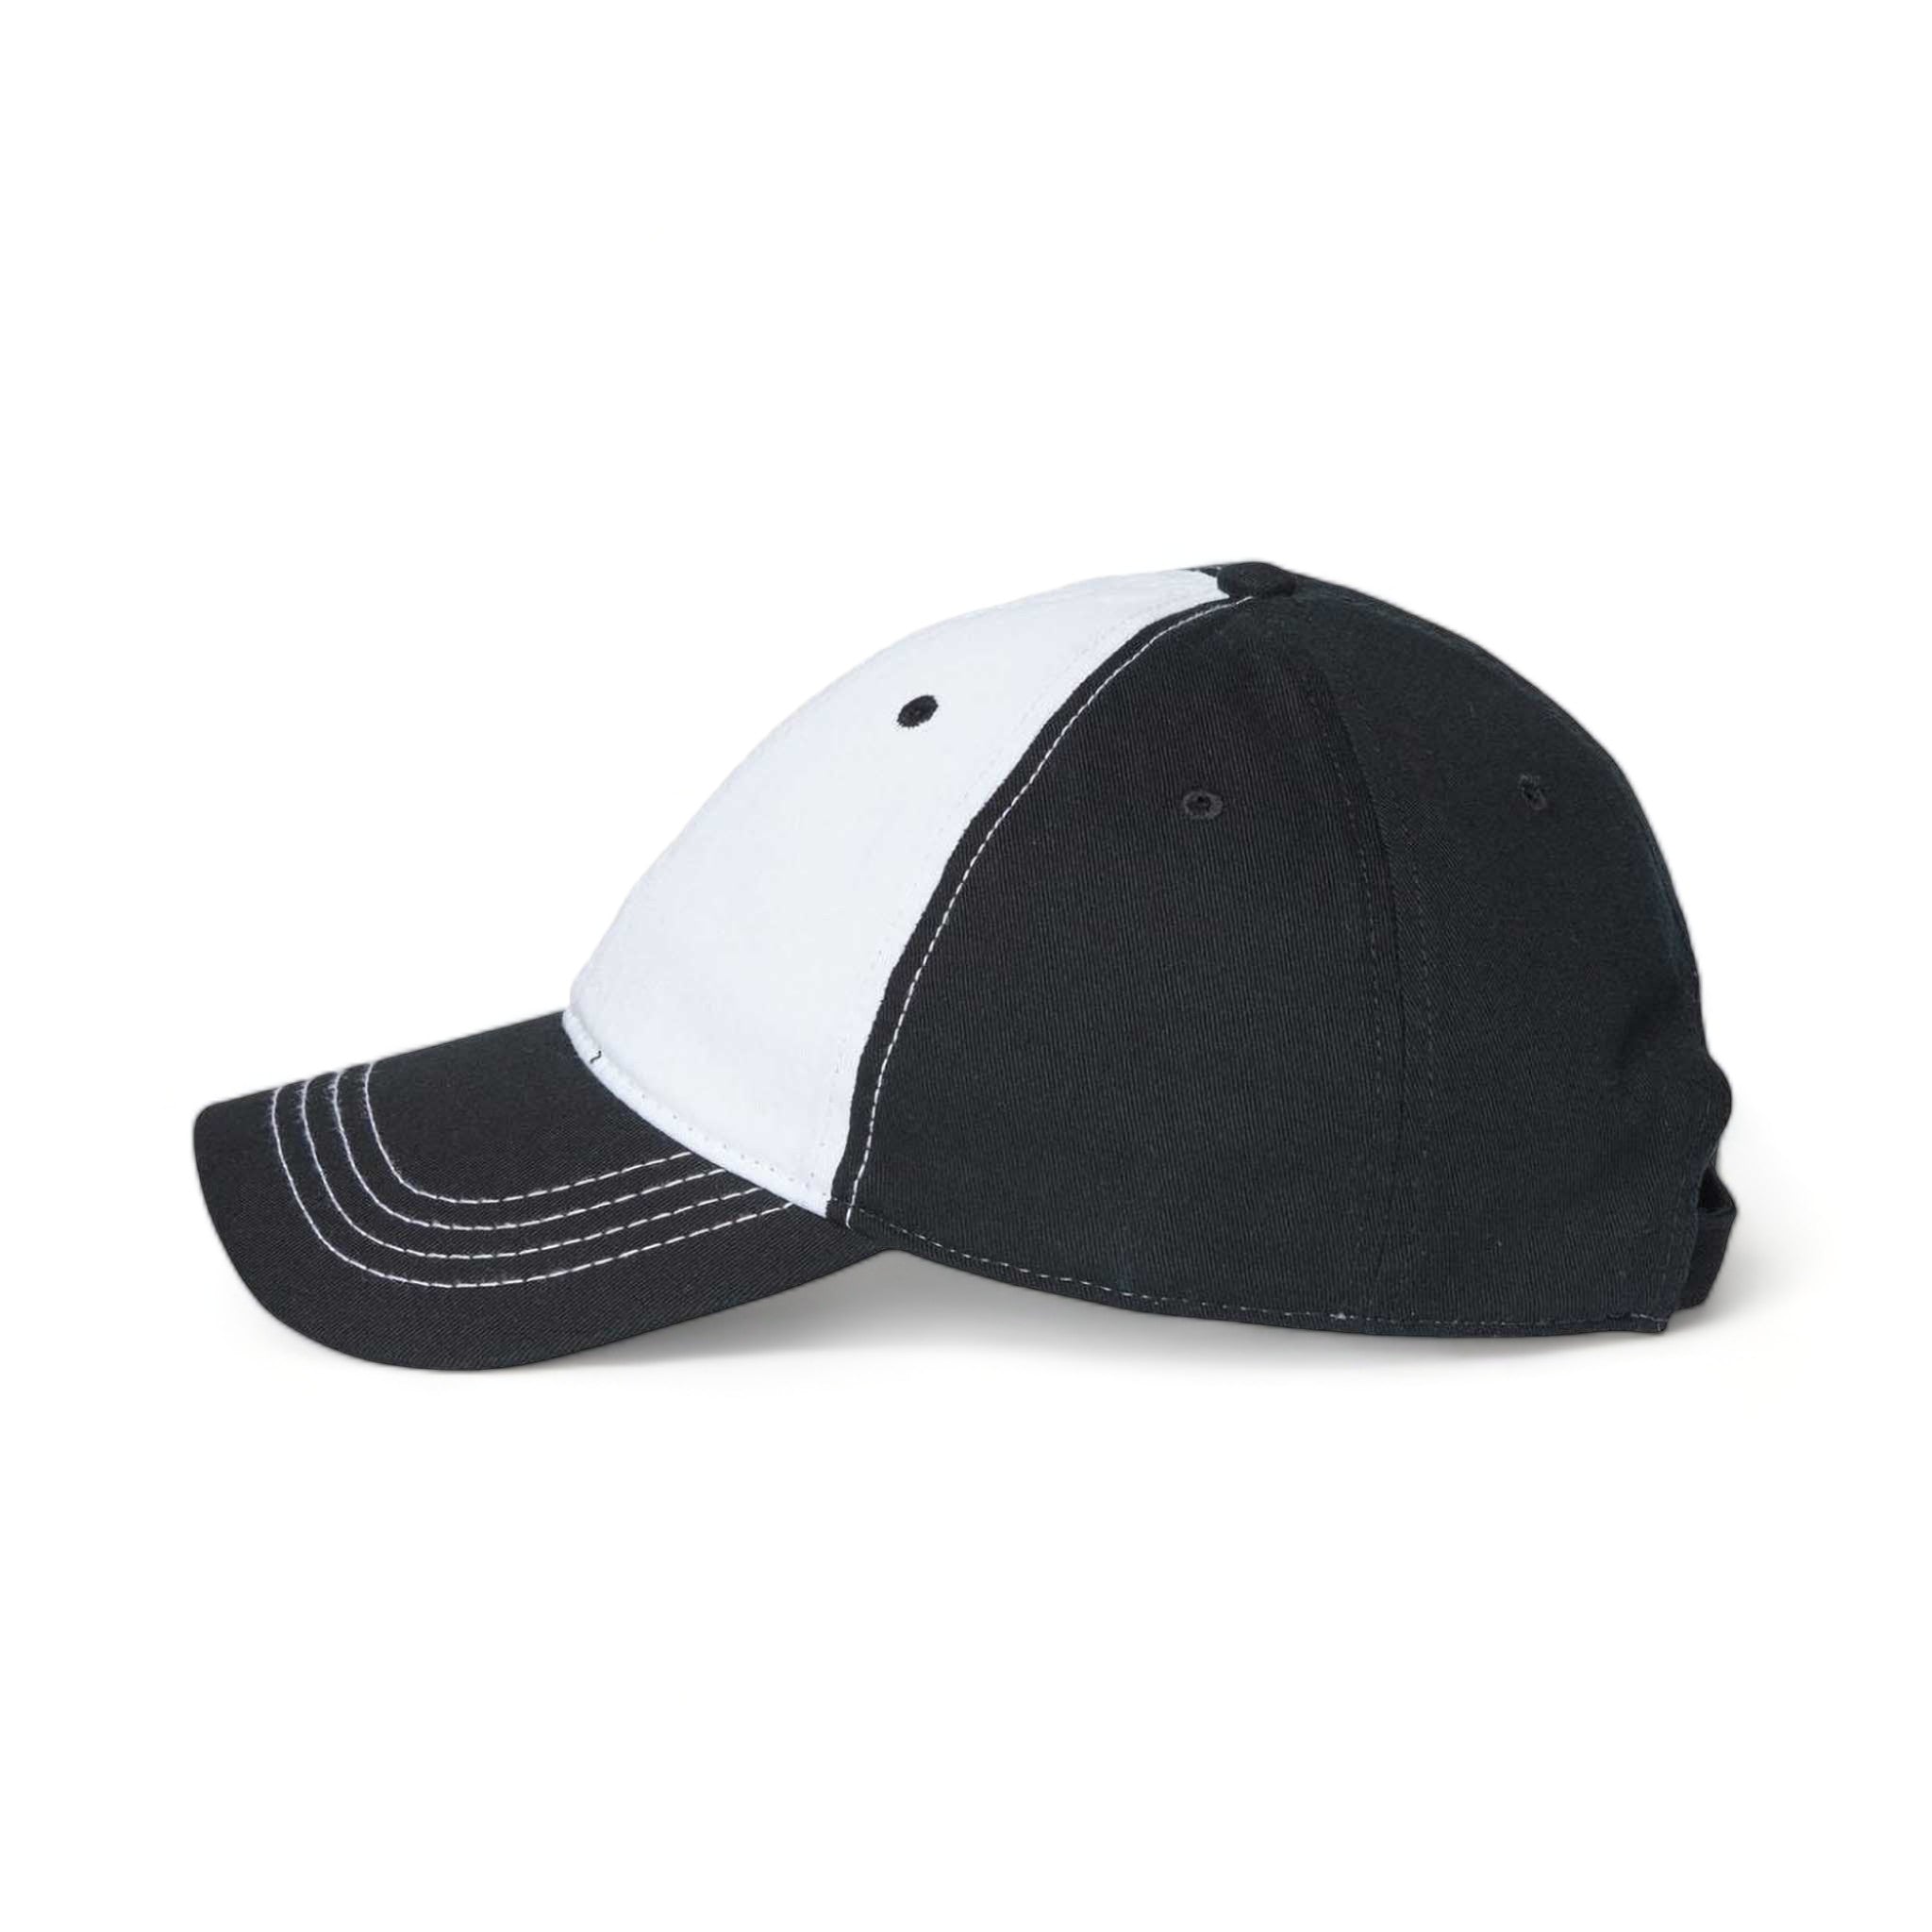 Side view of CAP AMERICA i1002 custom hat in white and black